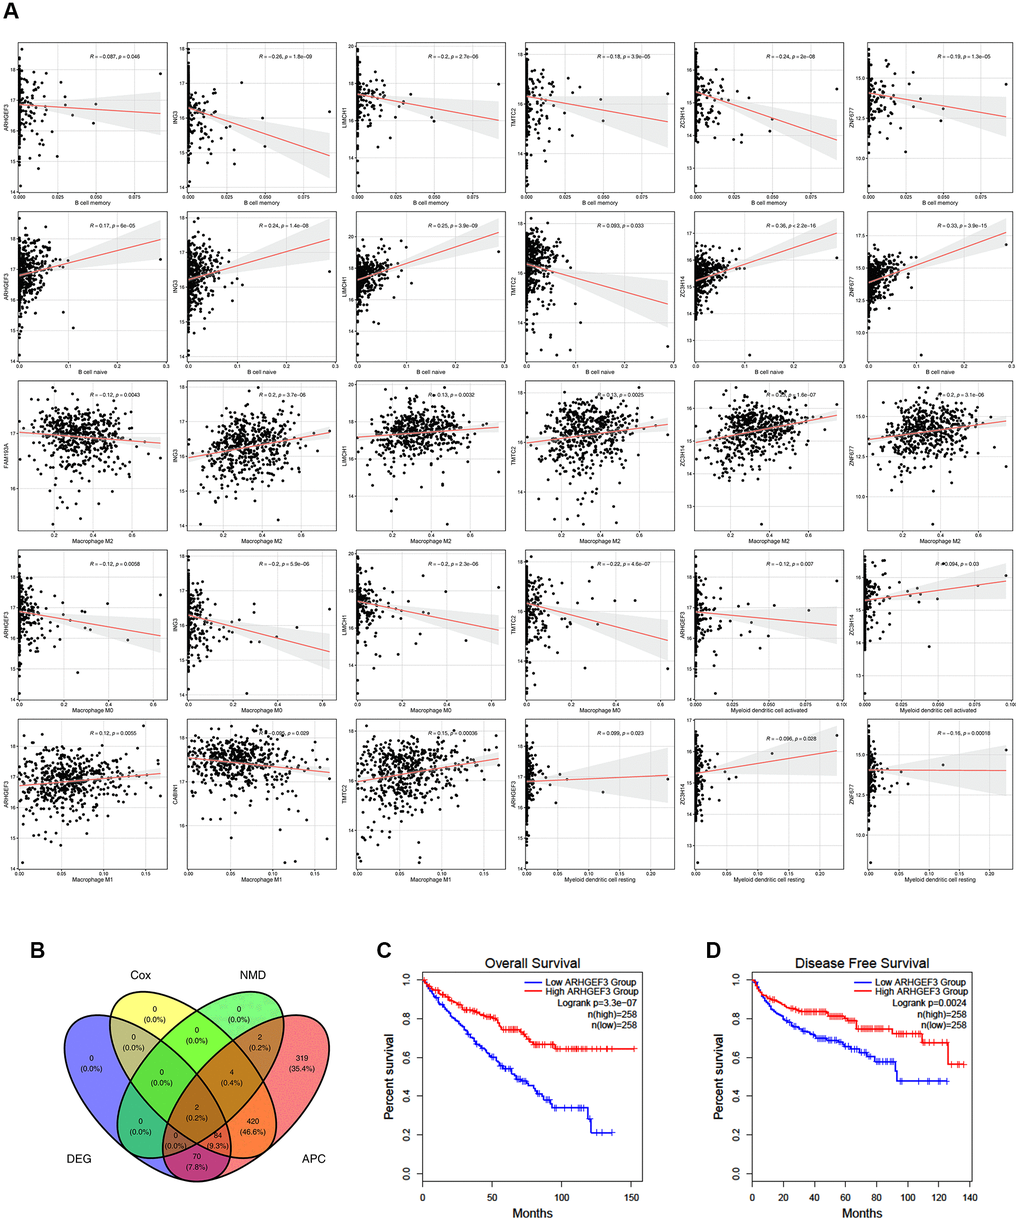 Potential antigens related to prognosis and antigen presenting cells (APC) in clear ccRCC patients. (A) ARHGEF3, ING3, LIMCH1, TMTC2, ZC3H14, and ZNF677 were closely related to APCs. (B) ARHGEF3 and ZNF677 were closely related to the expression difference, NMD factor difference, OS difference, and APC difference. (C) Effect of ARHGEF3 on overall survival rate in ccRCC patients. (D) Effect of ARHGEF3 on disease free survival rate in ccRCC patients.